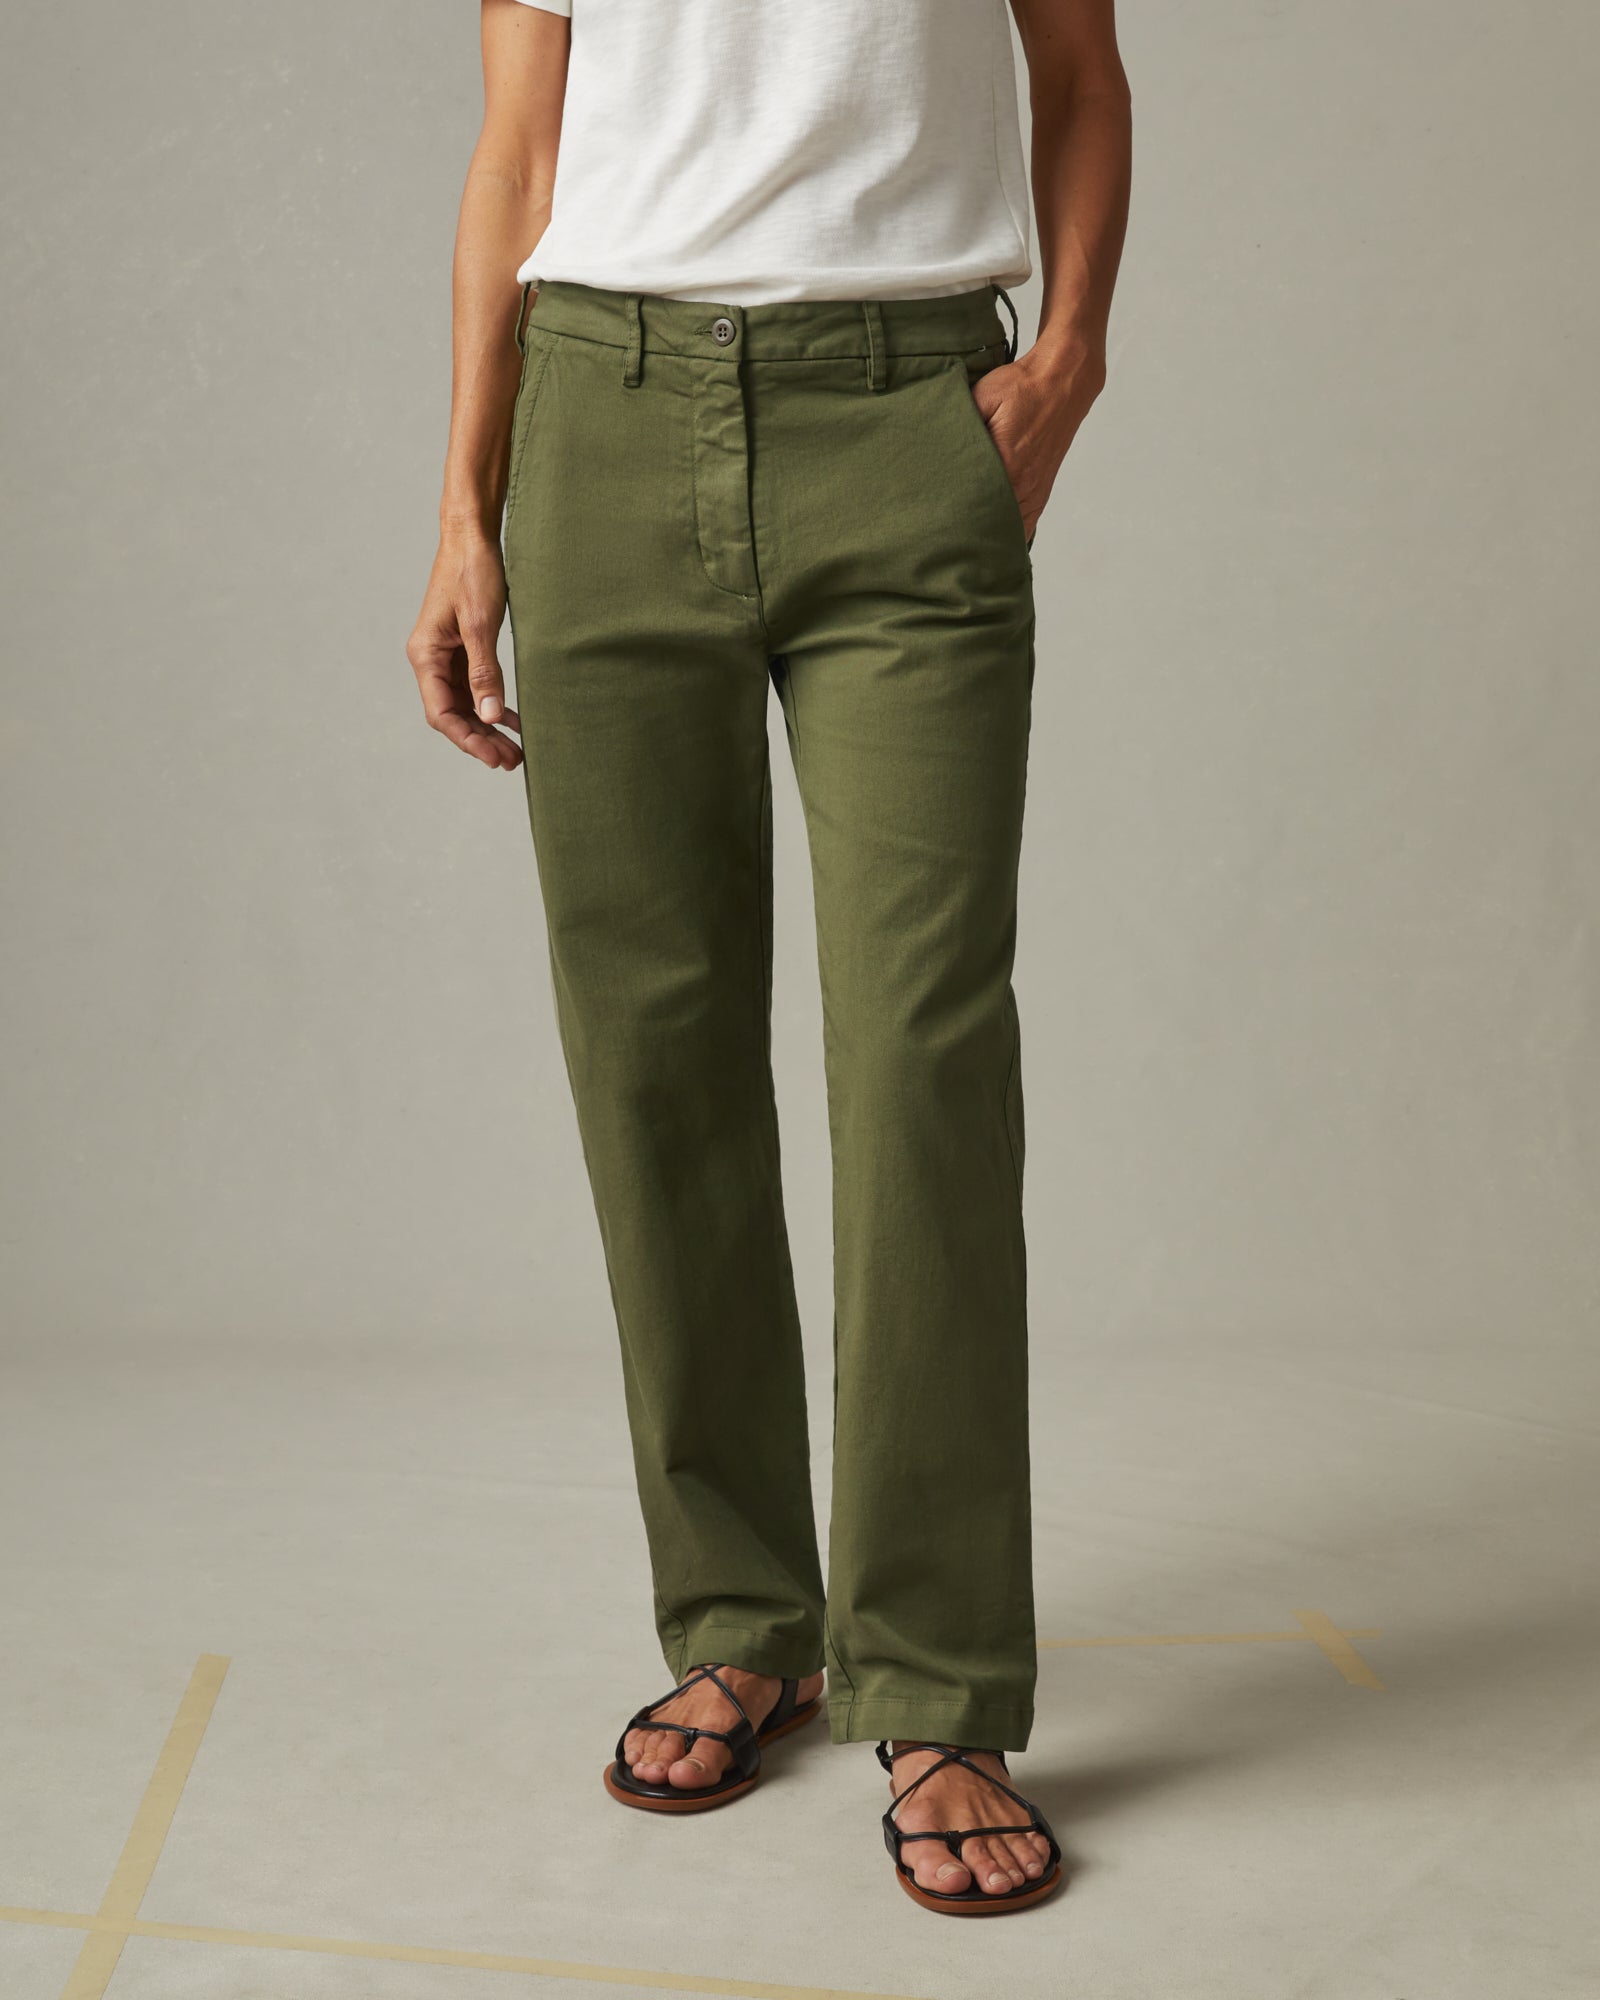 Women's Elastic Waist Pull-On Chino Pants | Lands' End